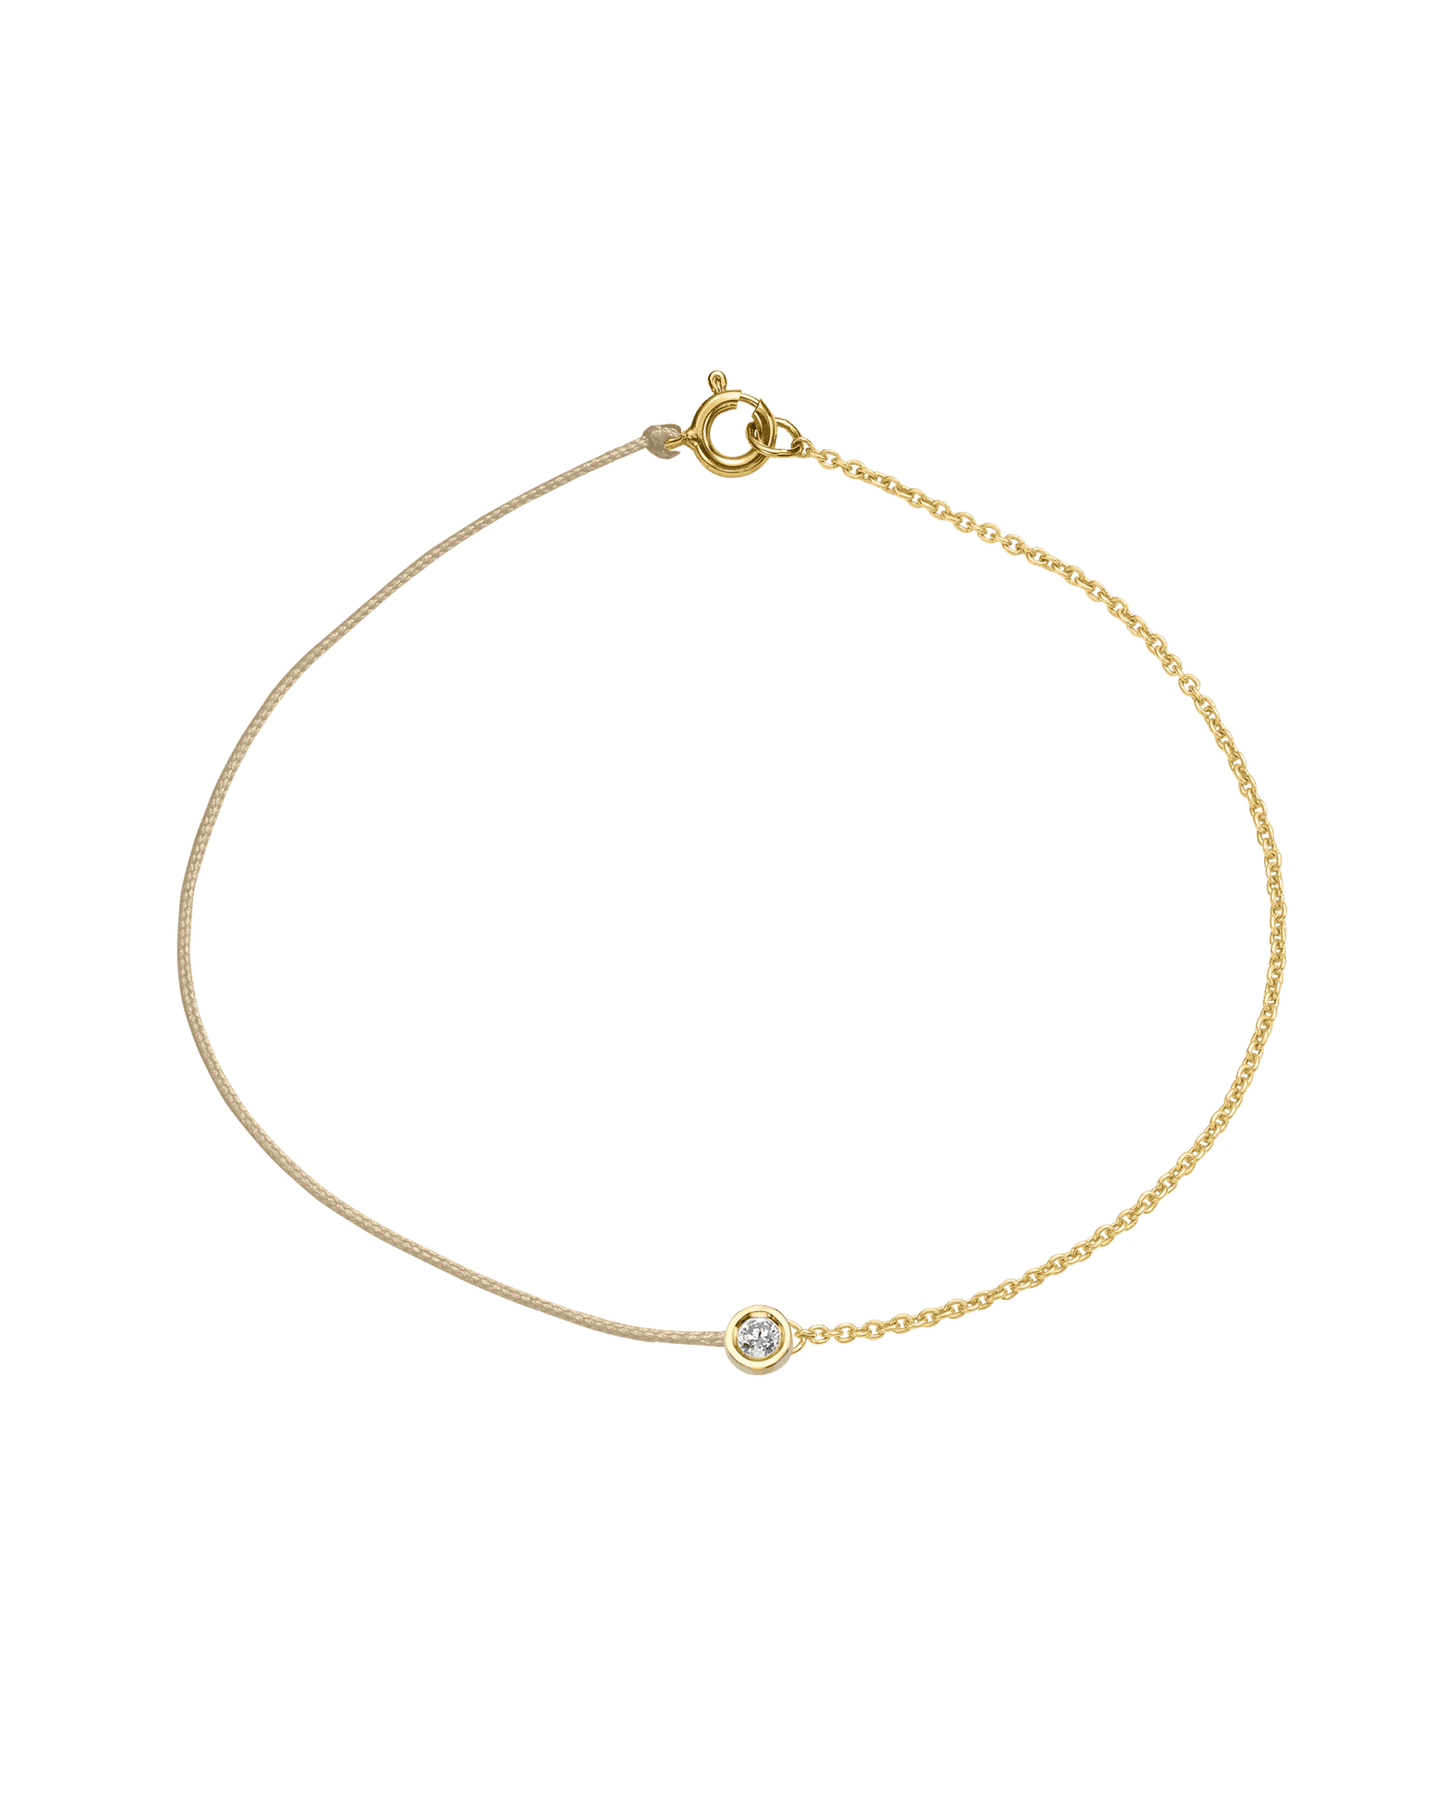 The Half Chain String of Love - 14K Yellow Gold Bracelet 14K Solid Gold Beige Medium: 0.04ct Small 6 Inches